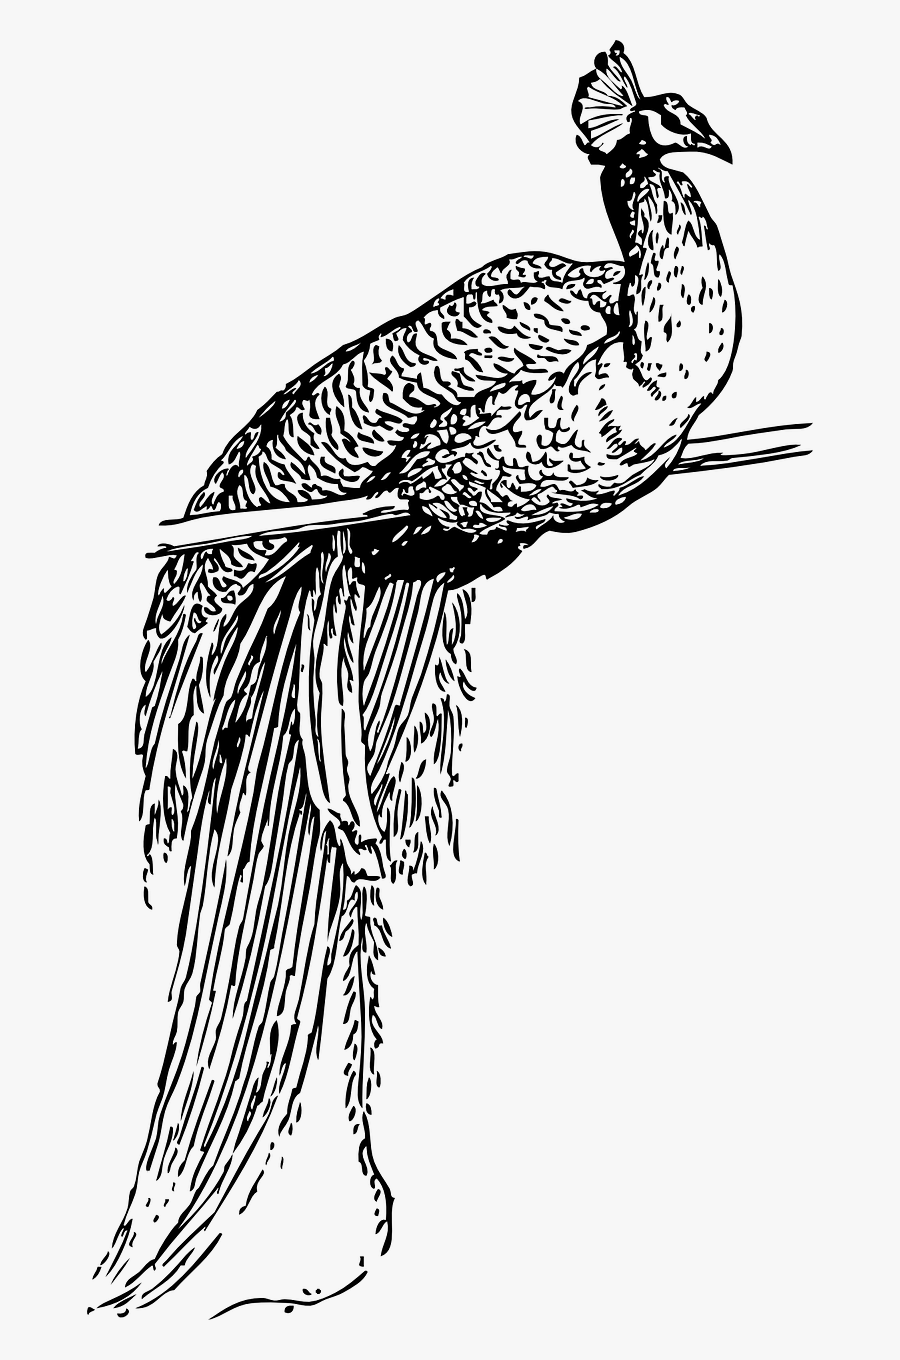 Peacock - Line Art Peacock Images Png, Transparent Clipart